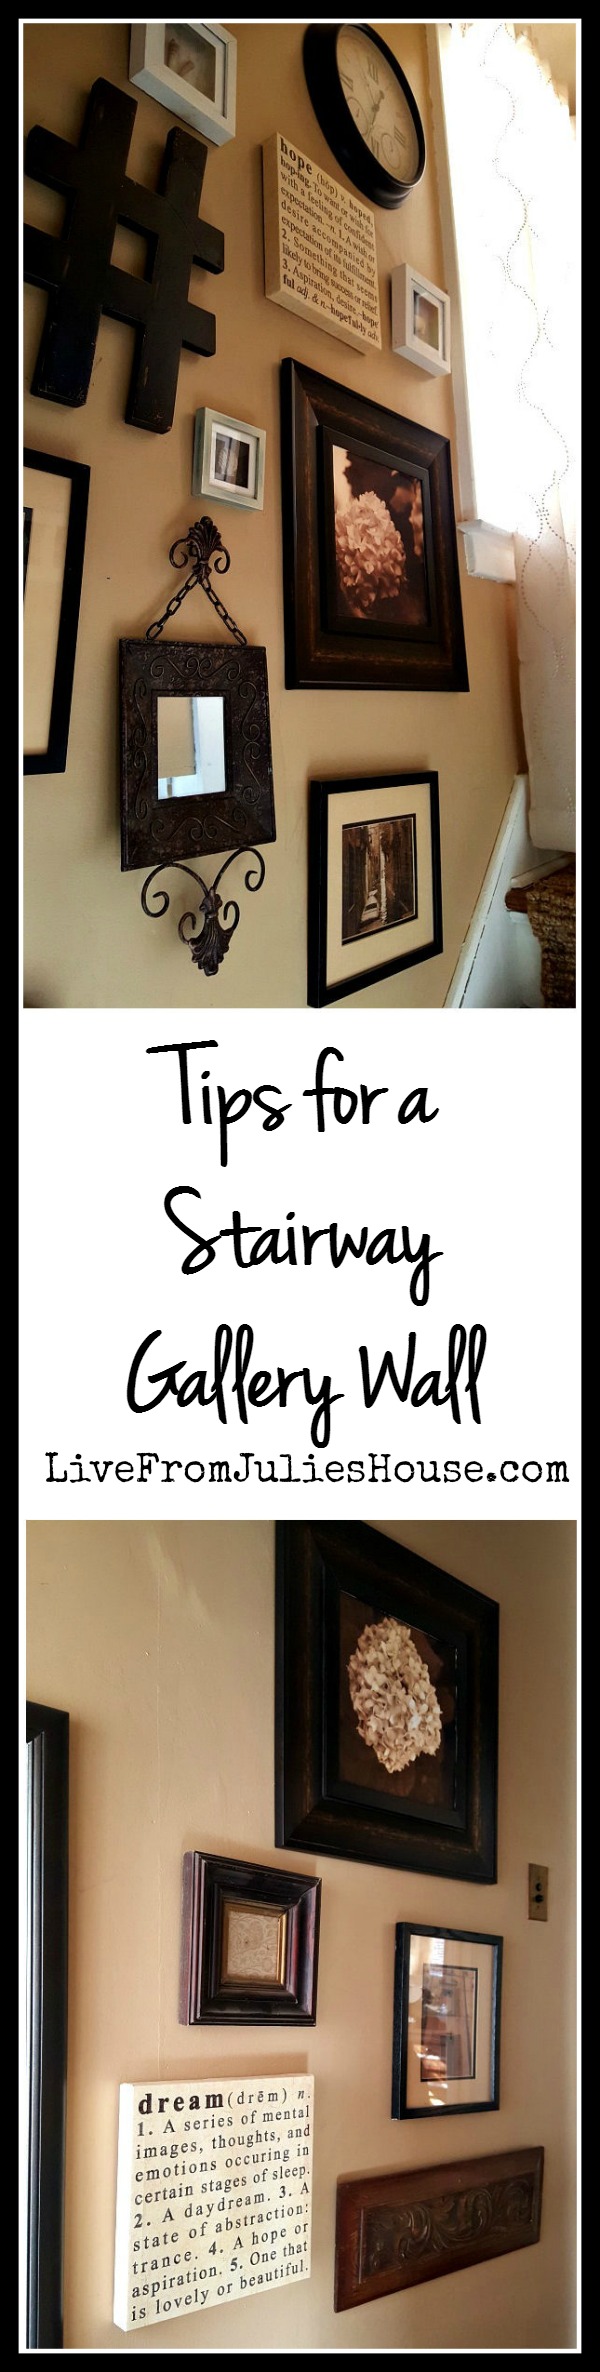 Stairway Gallery Wall - Check out my best tips for an interesting gallery wall display